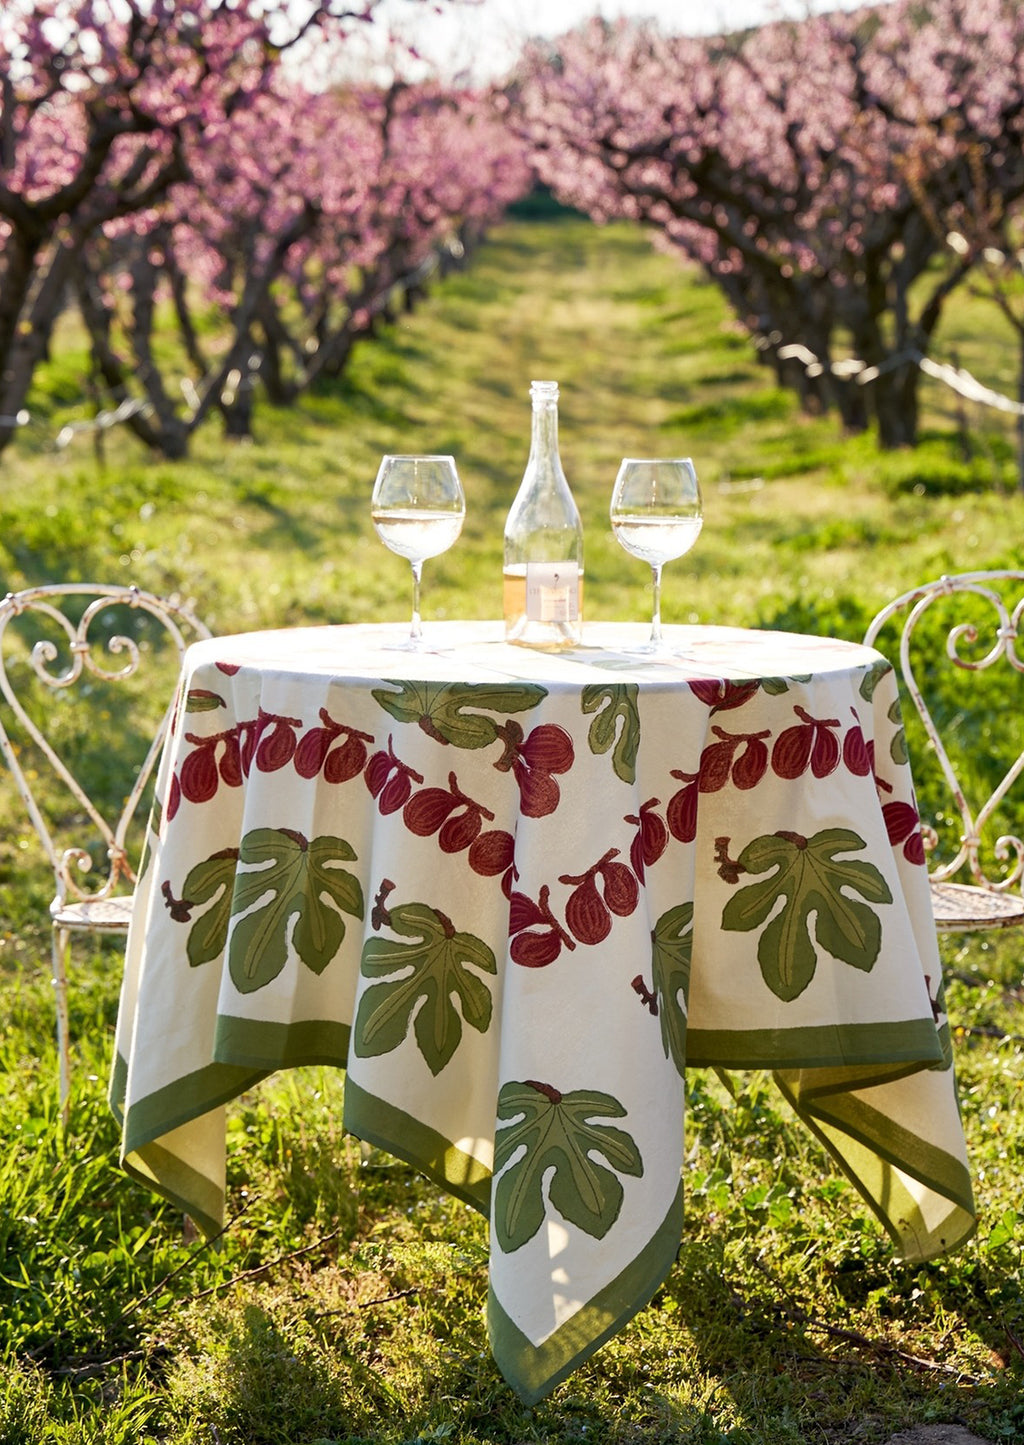 2: A block printed tablecloth with fig fruit and leaf pattern.